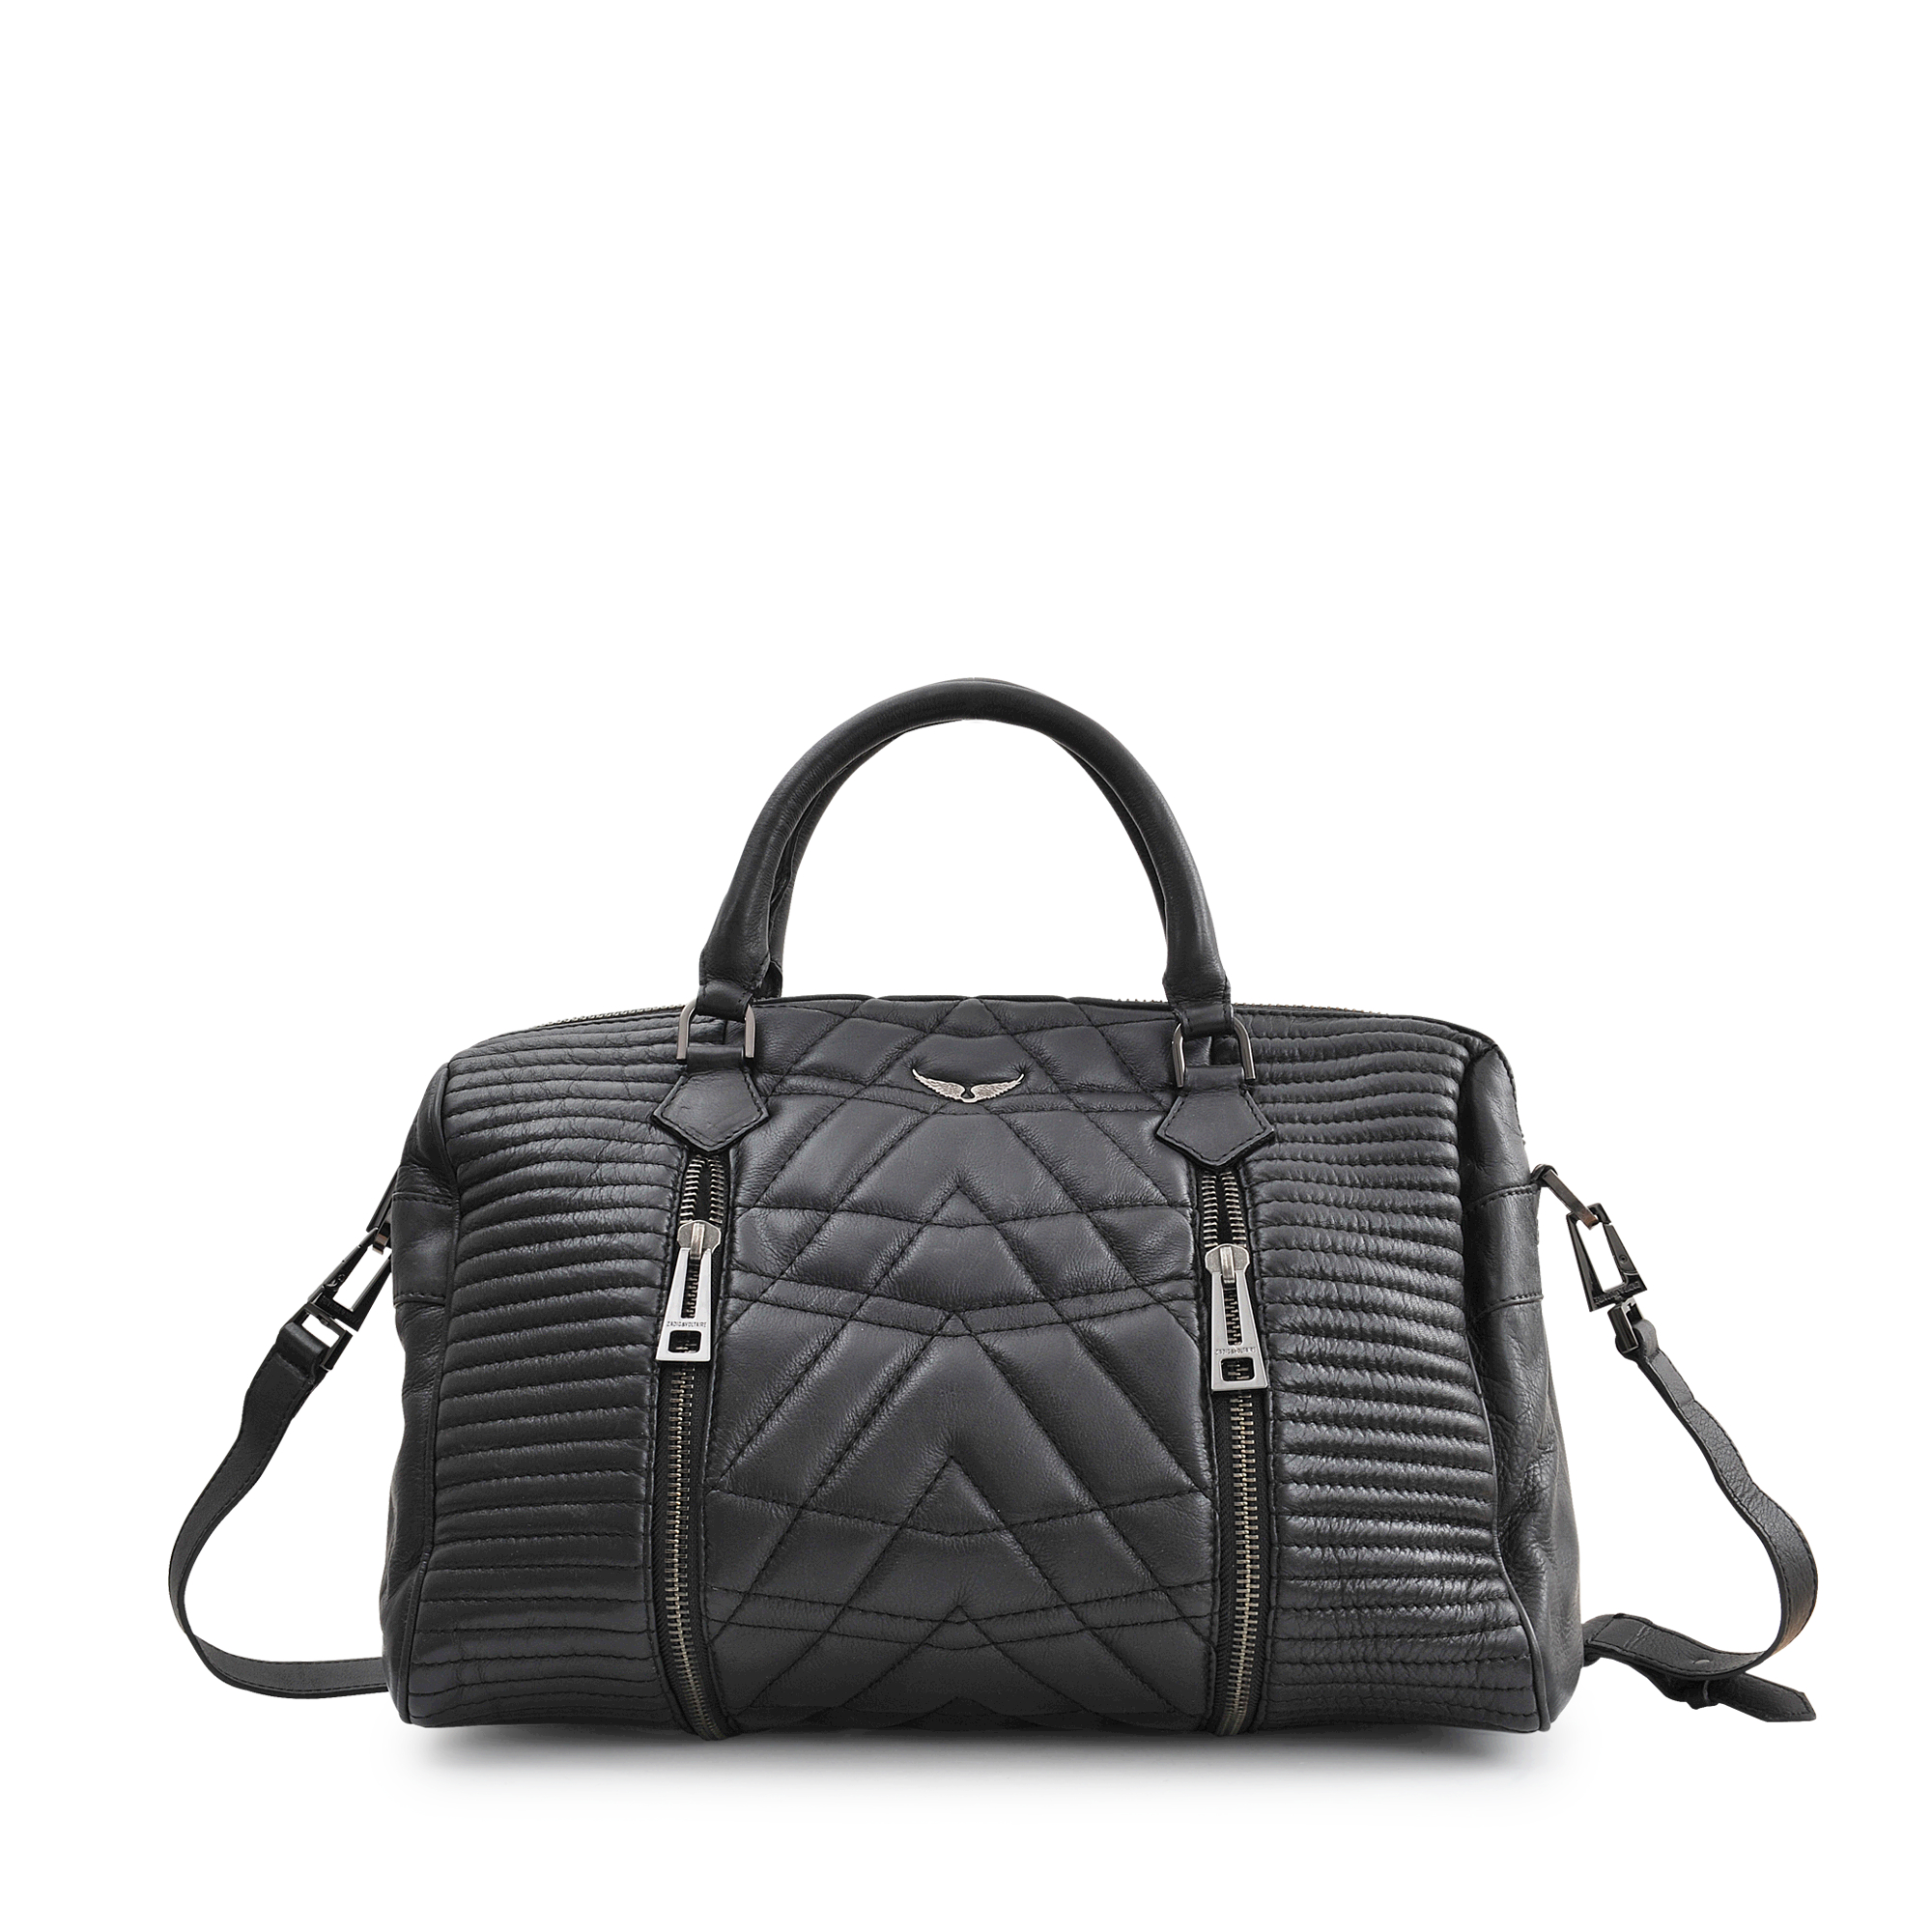 Zadig & Voltaire Sunny Quilted Bag in Black | Lyst